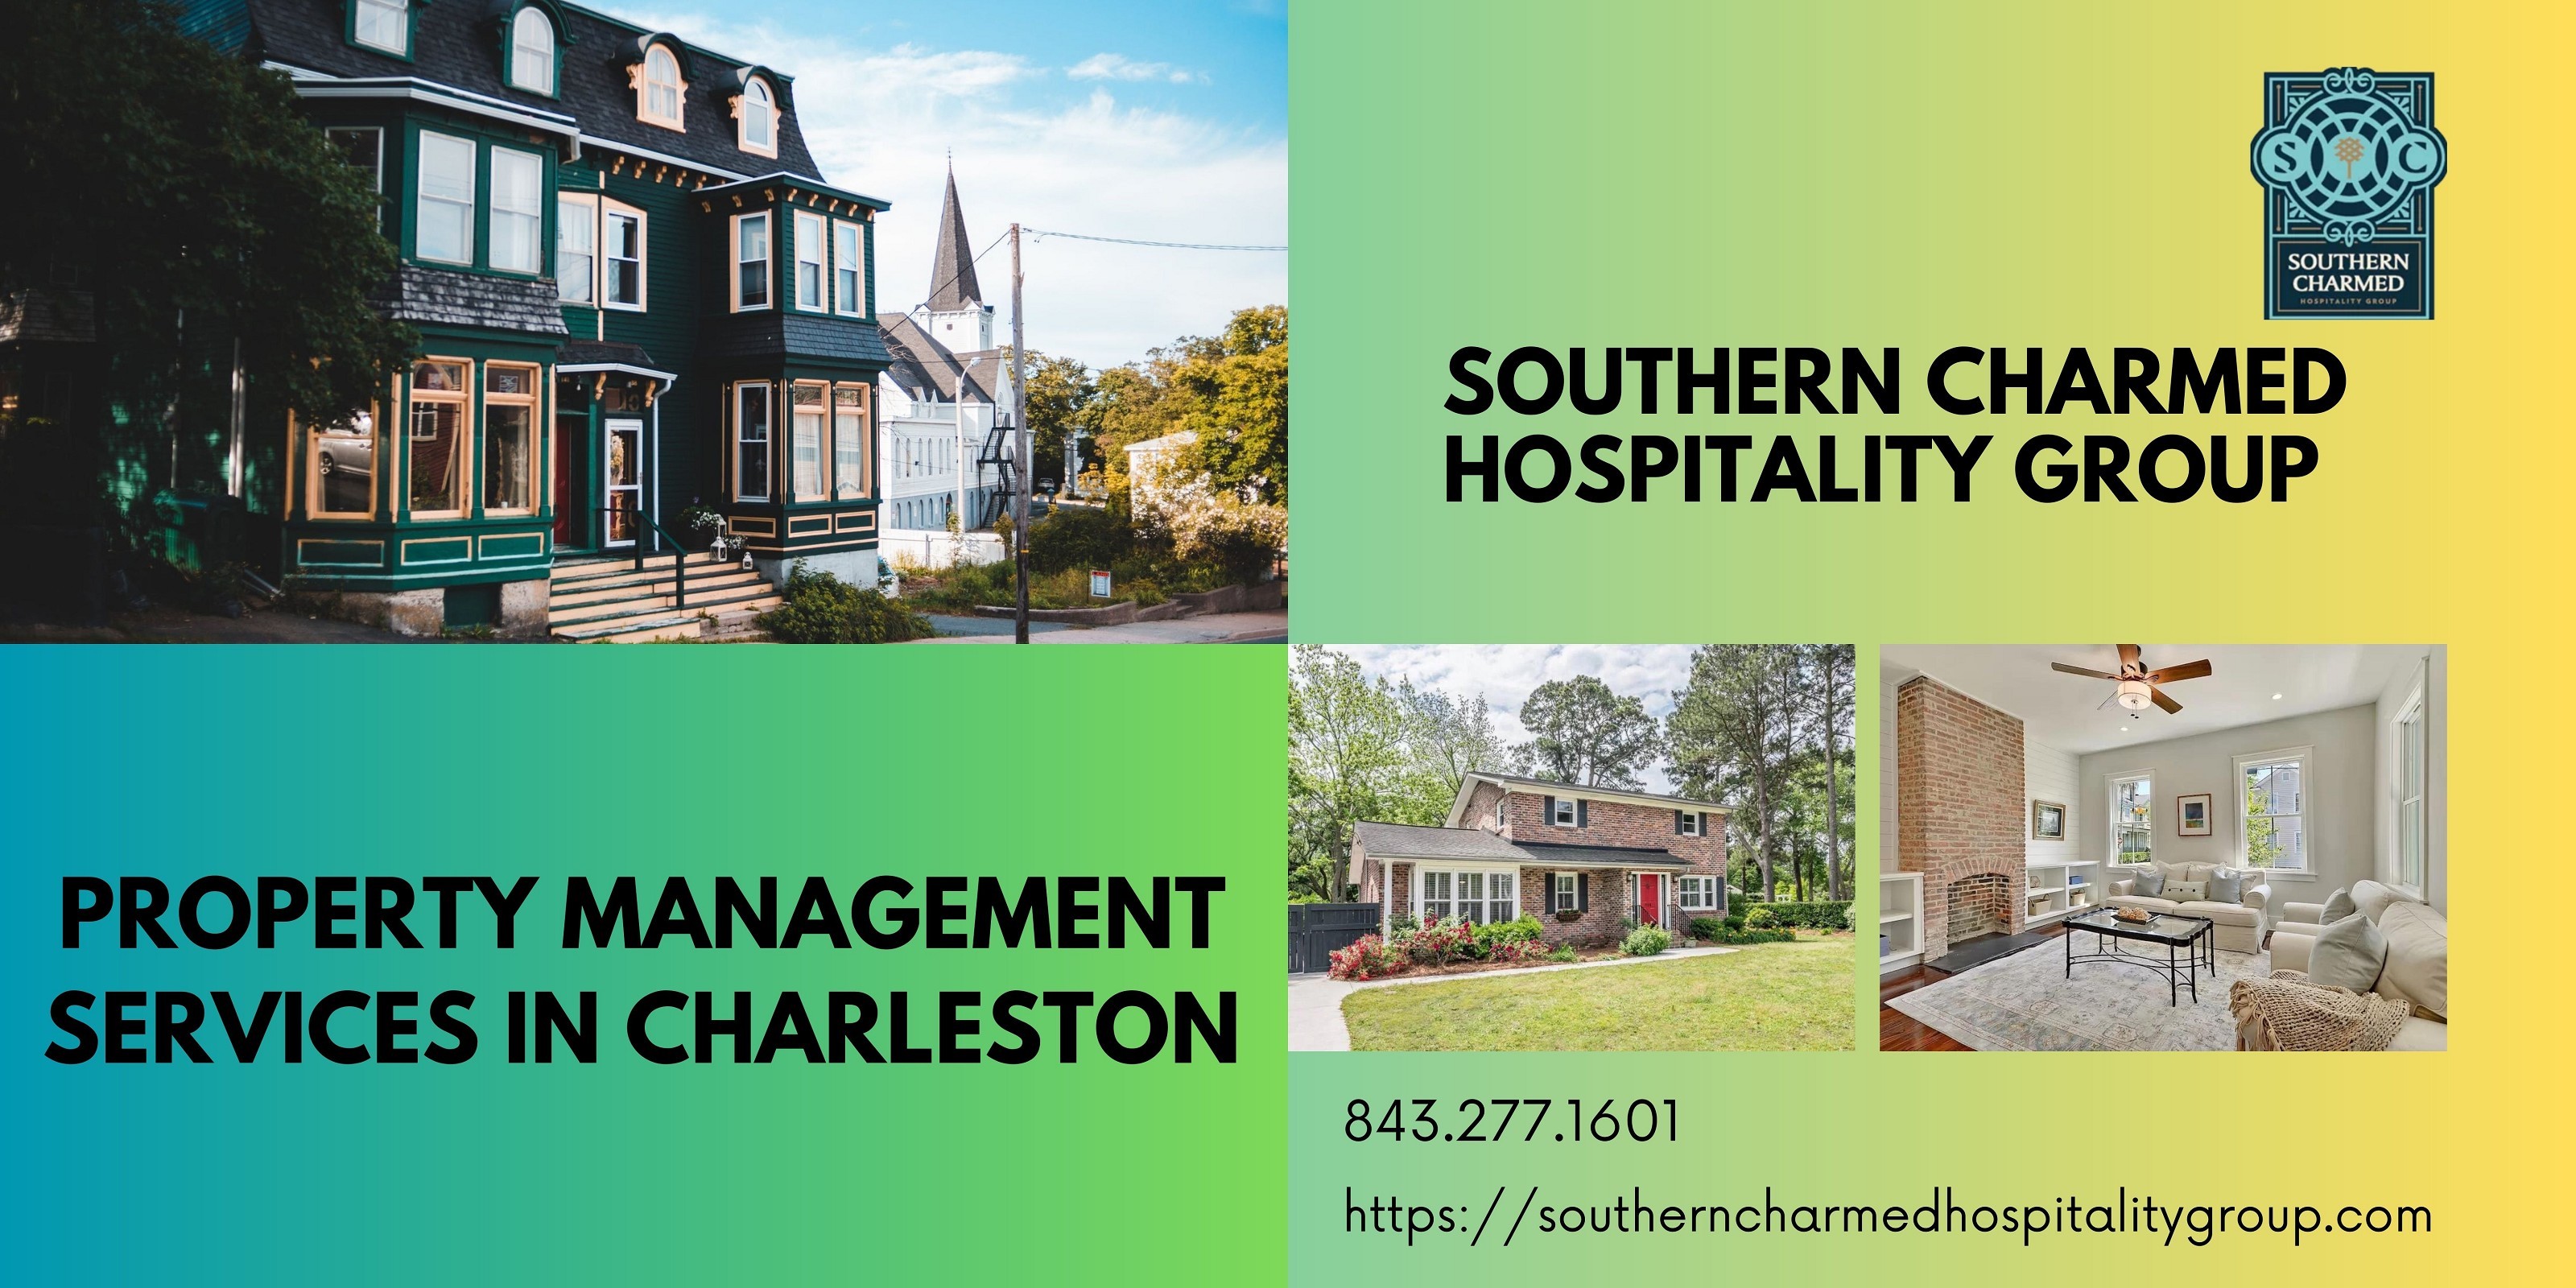 Find The Best Property Management Services in Charleston